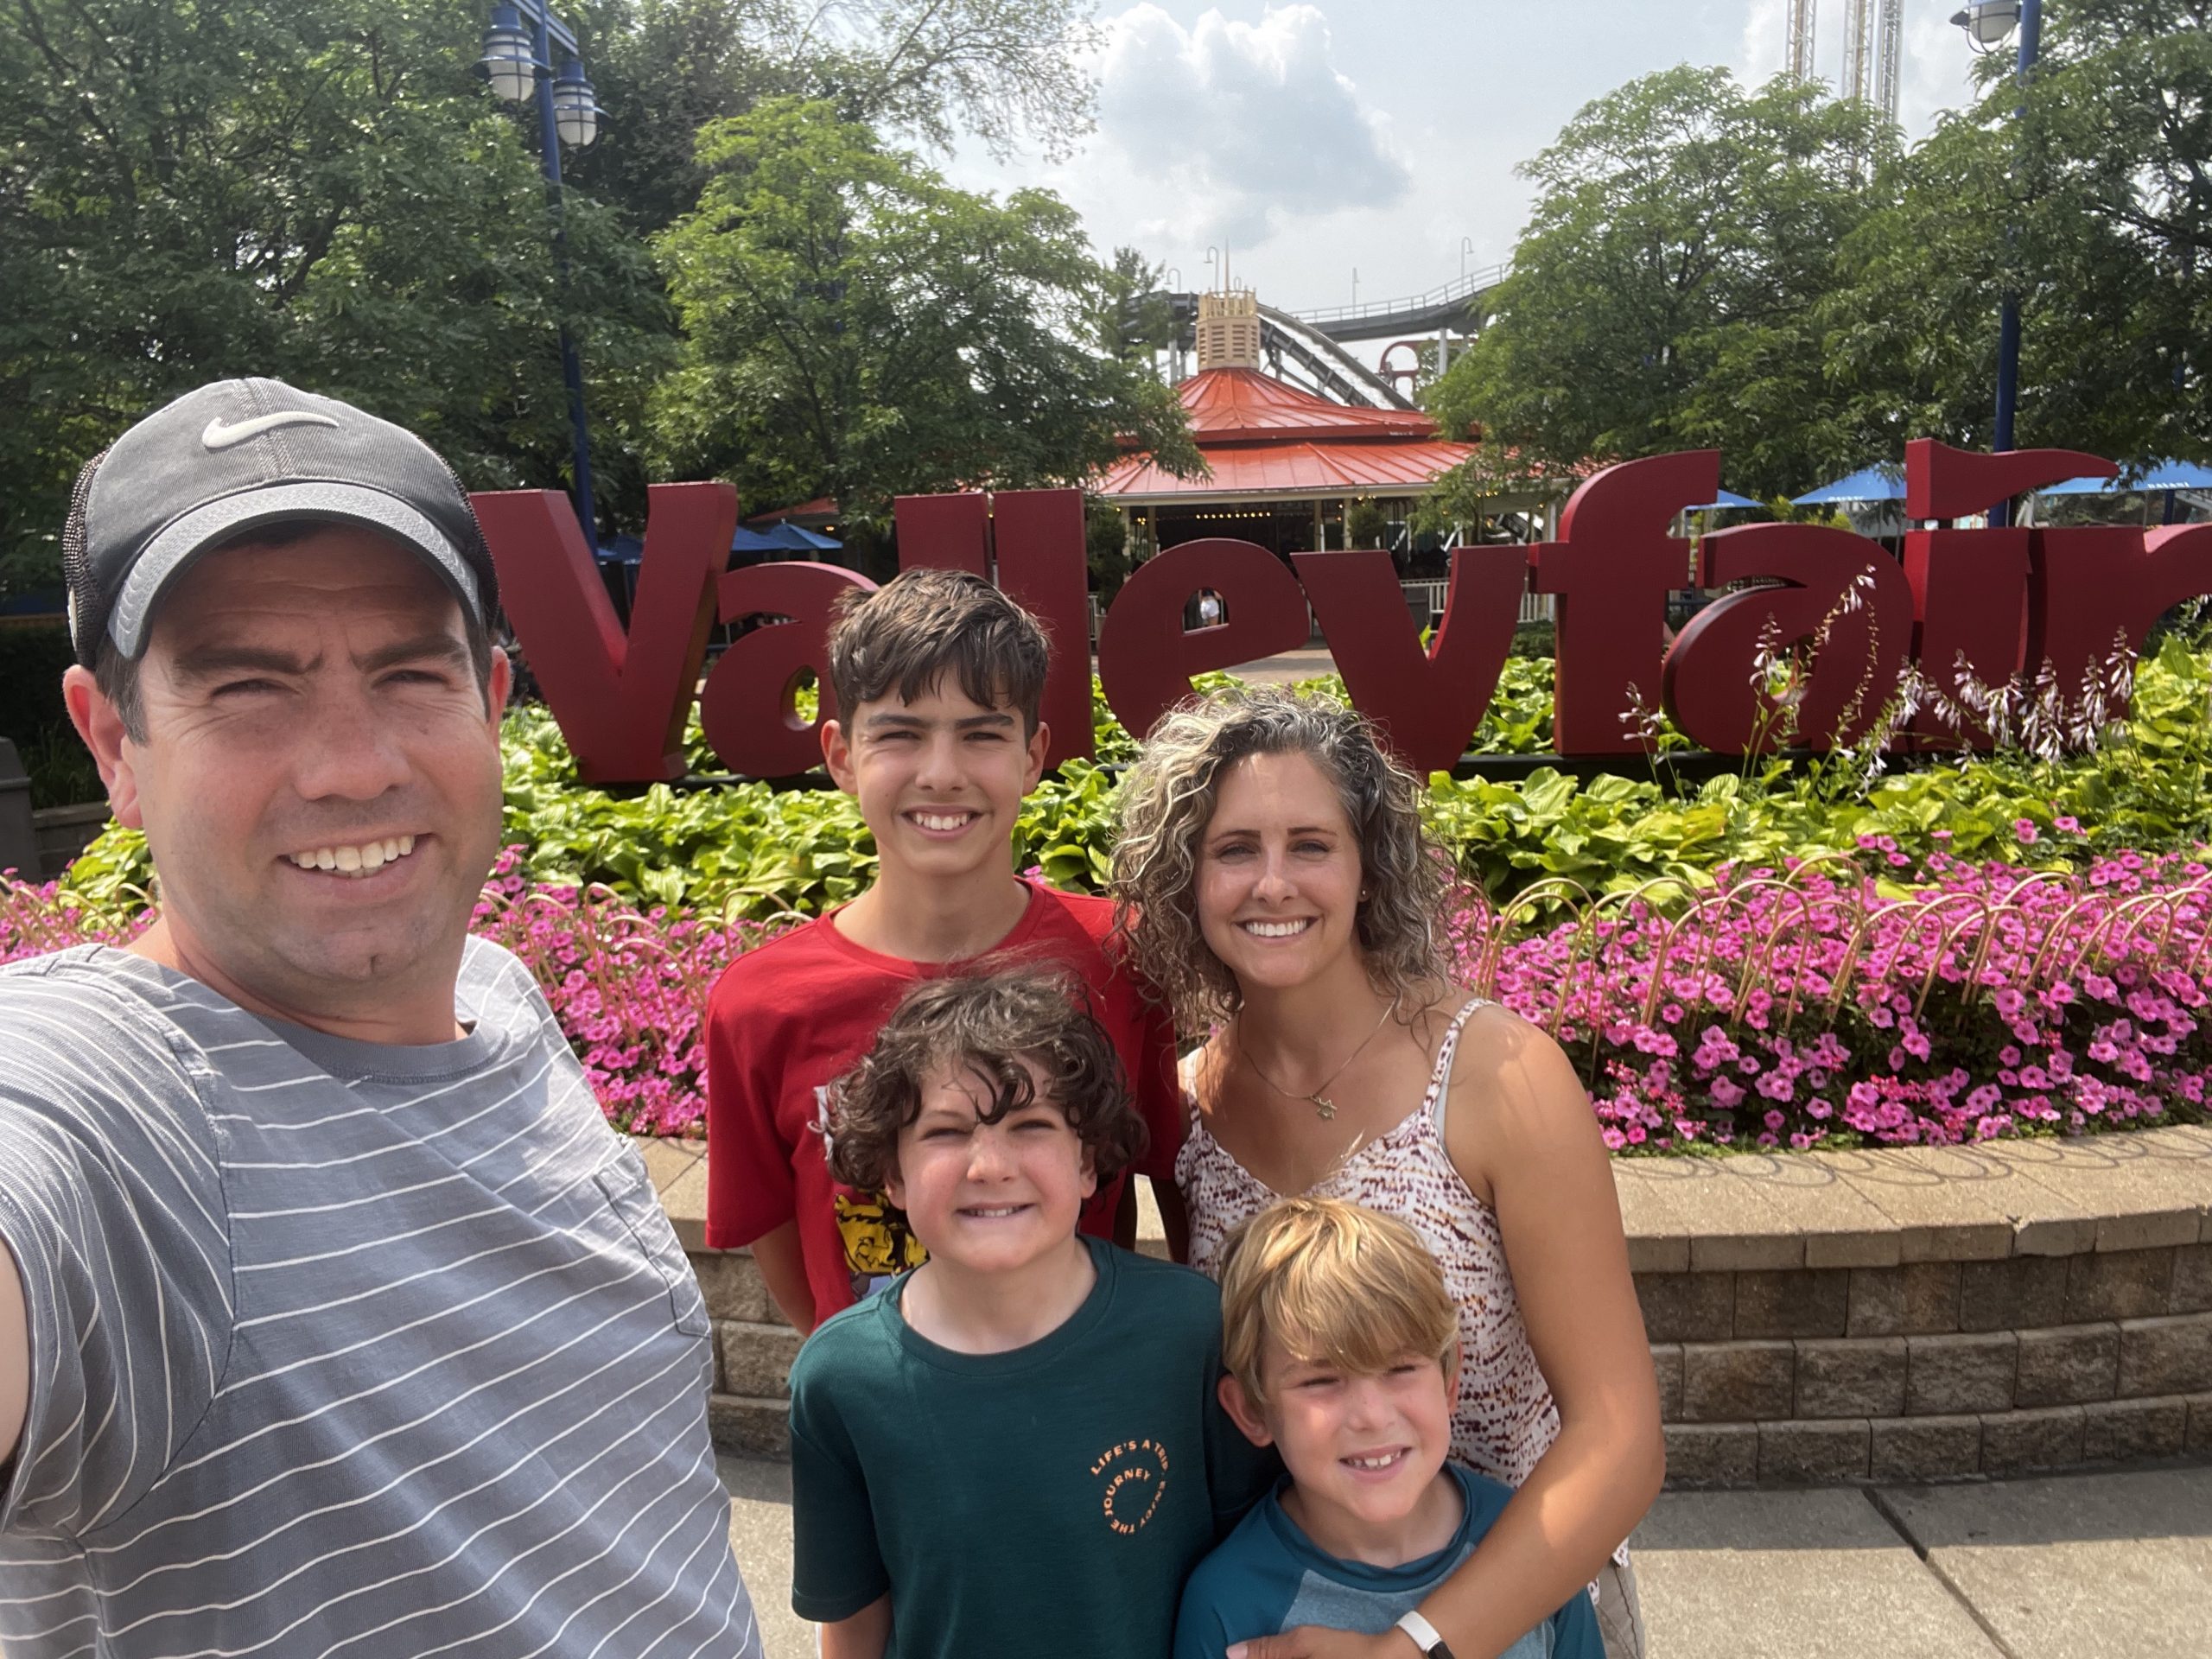 Our Visit To Valley Fair in Minnesota